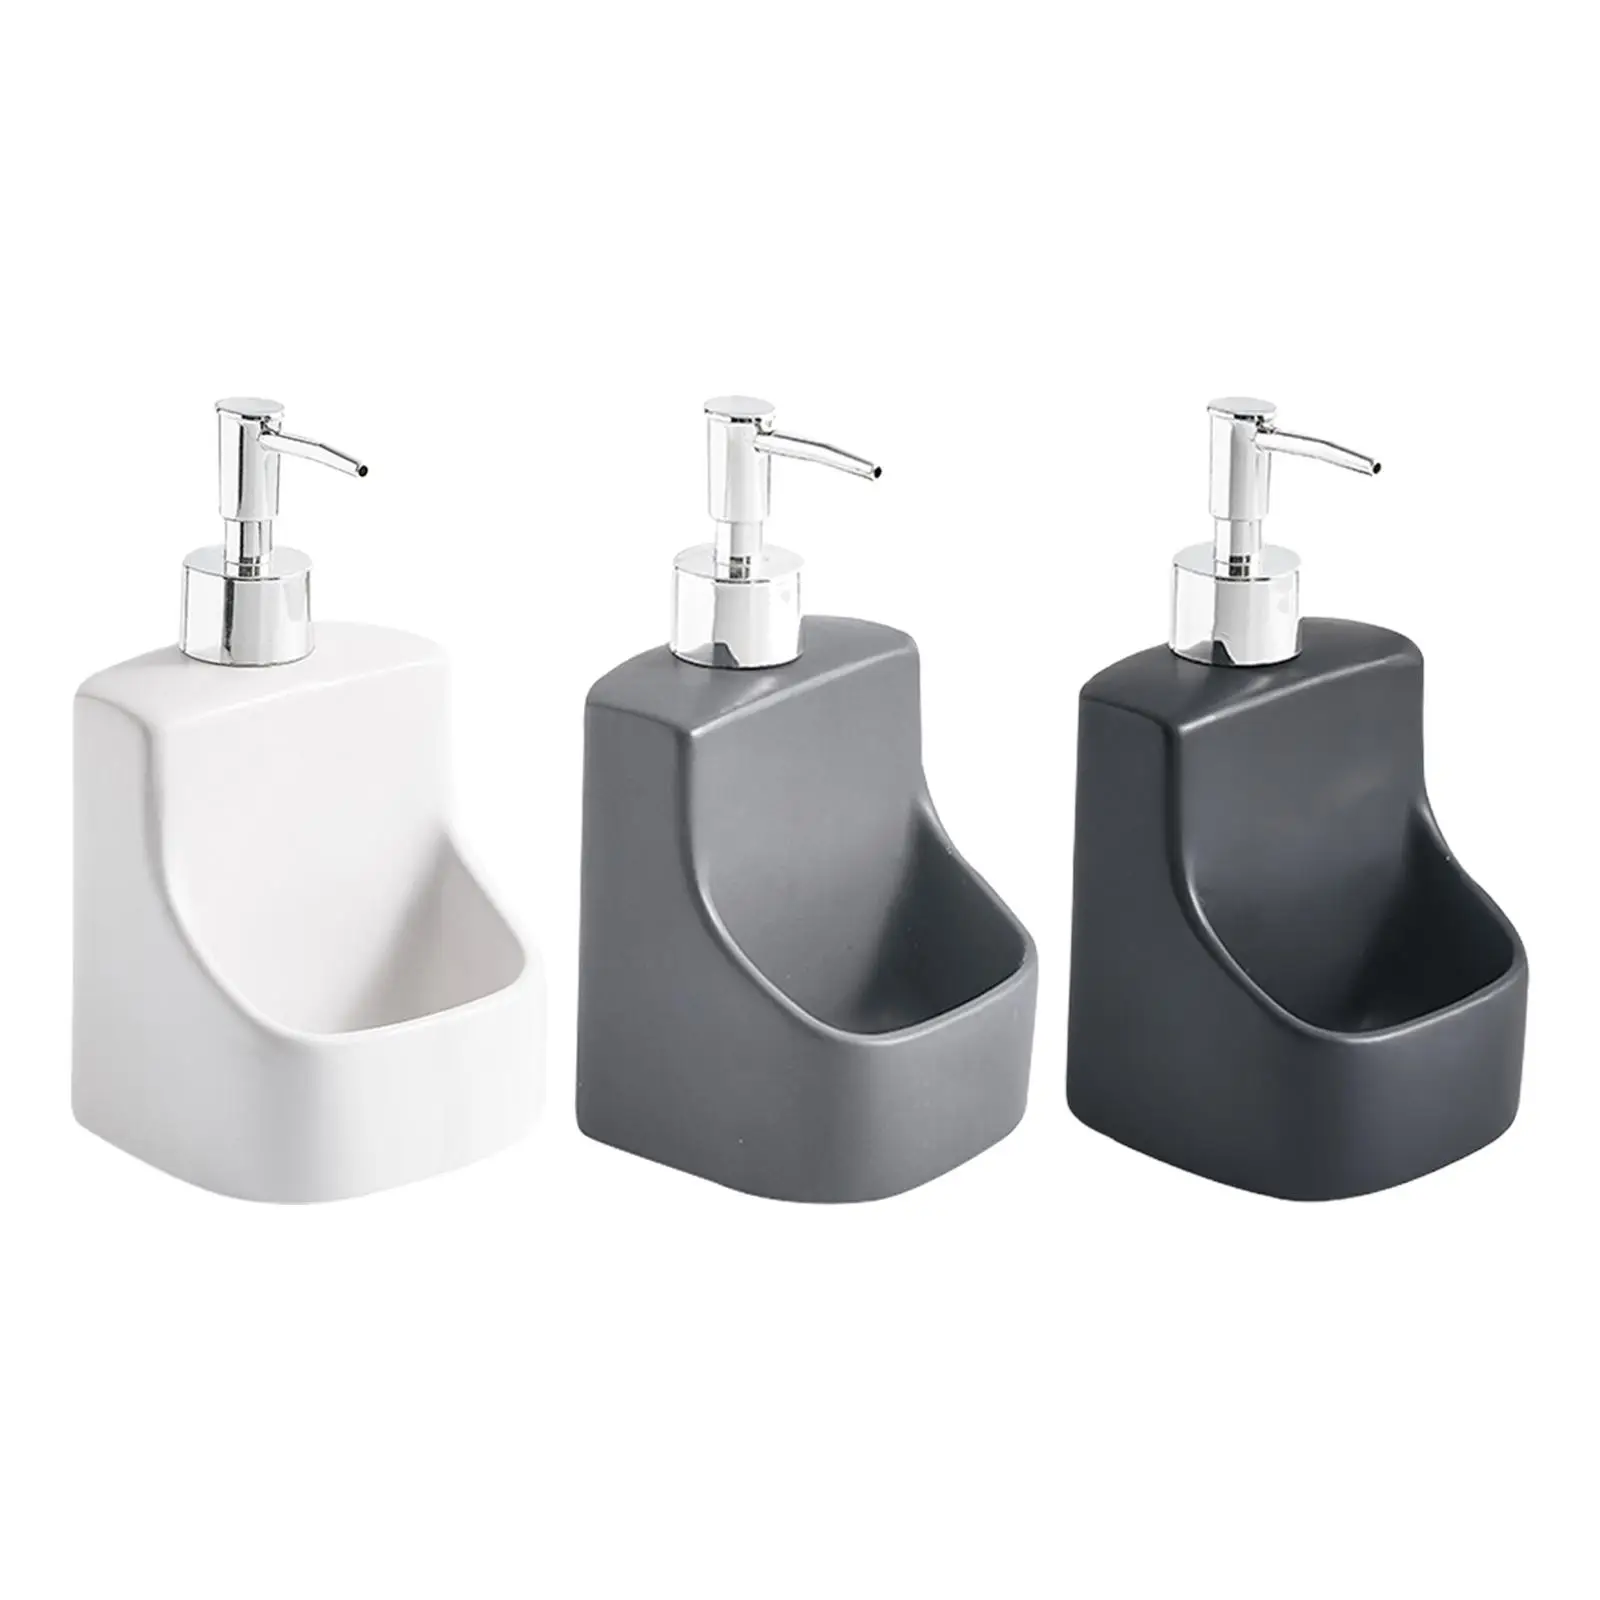 Hand Soap Dispenser Portable with Pump Reusable for Outdoor Bathroom Travel